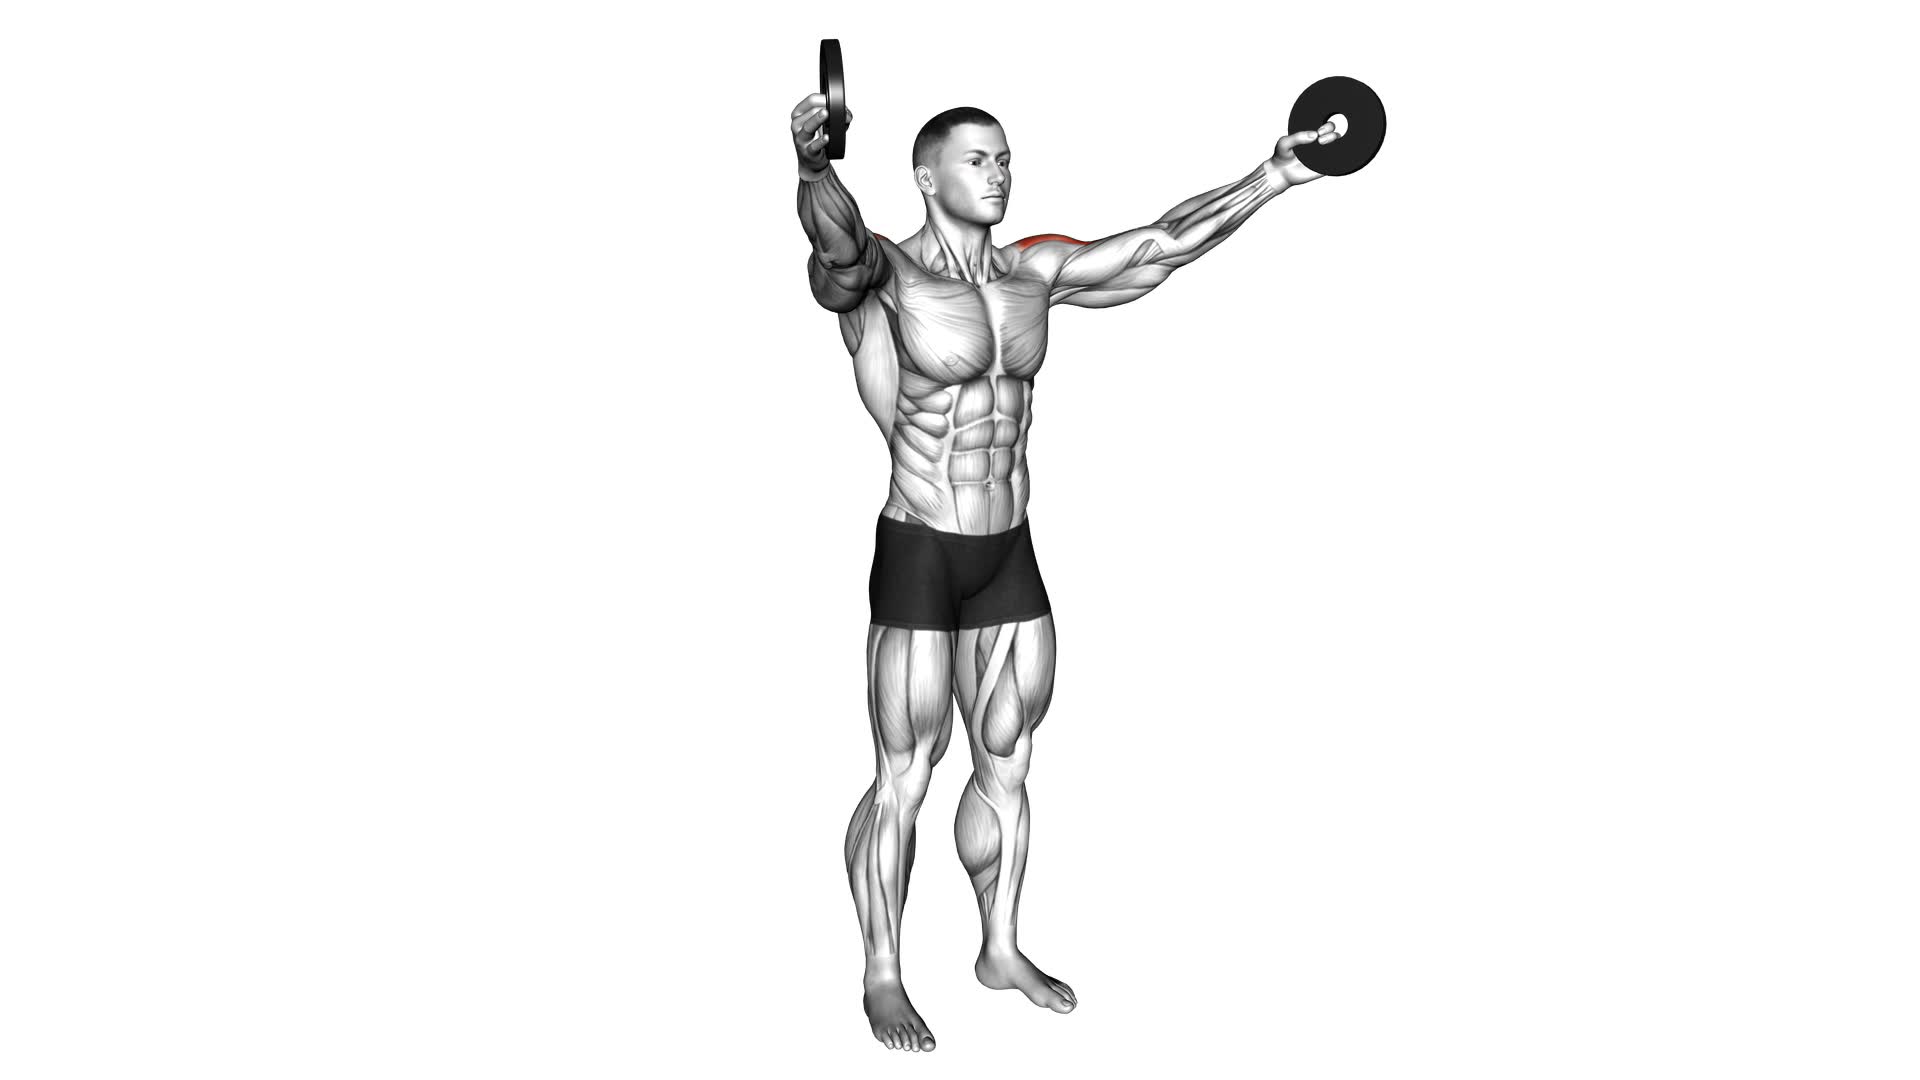 Weighted Full Can Exercise (male) - Video Exercise Guide & Tips